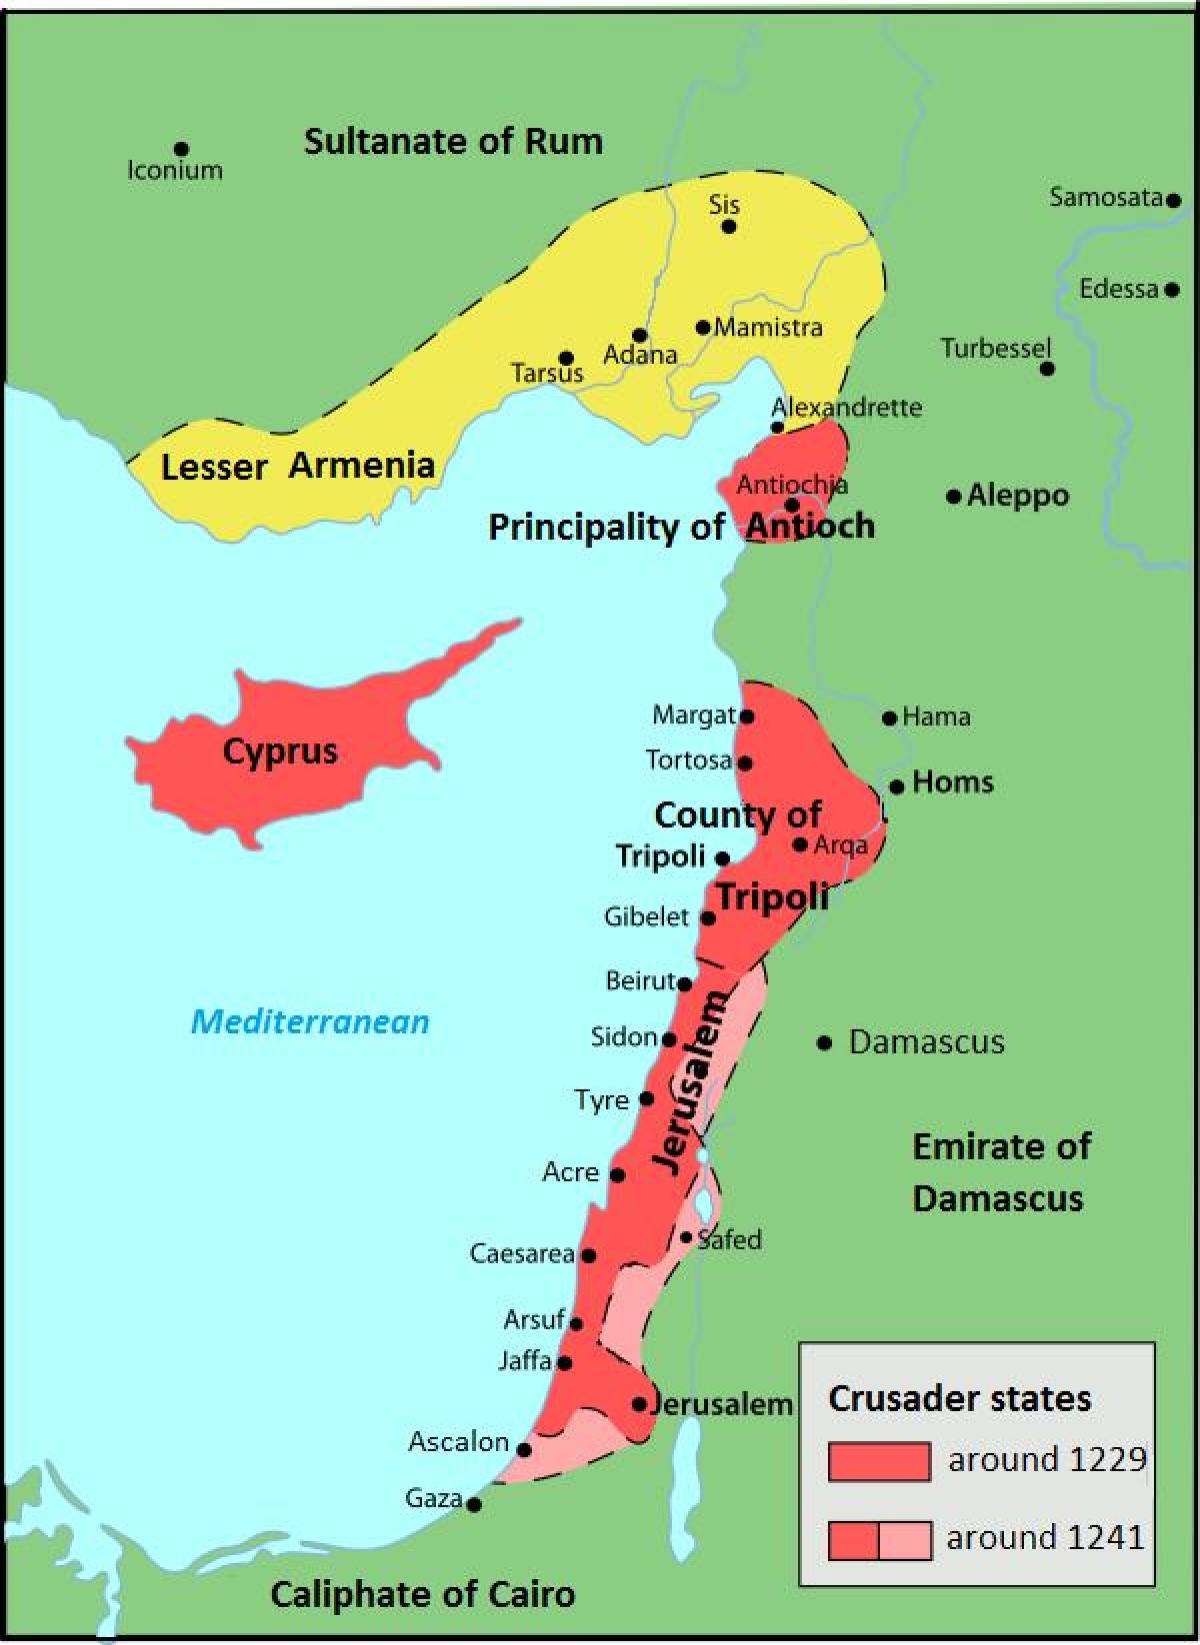 map of the Holy land during the crusades